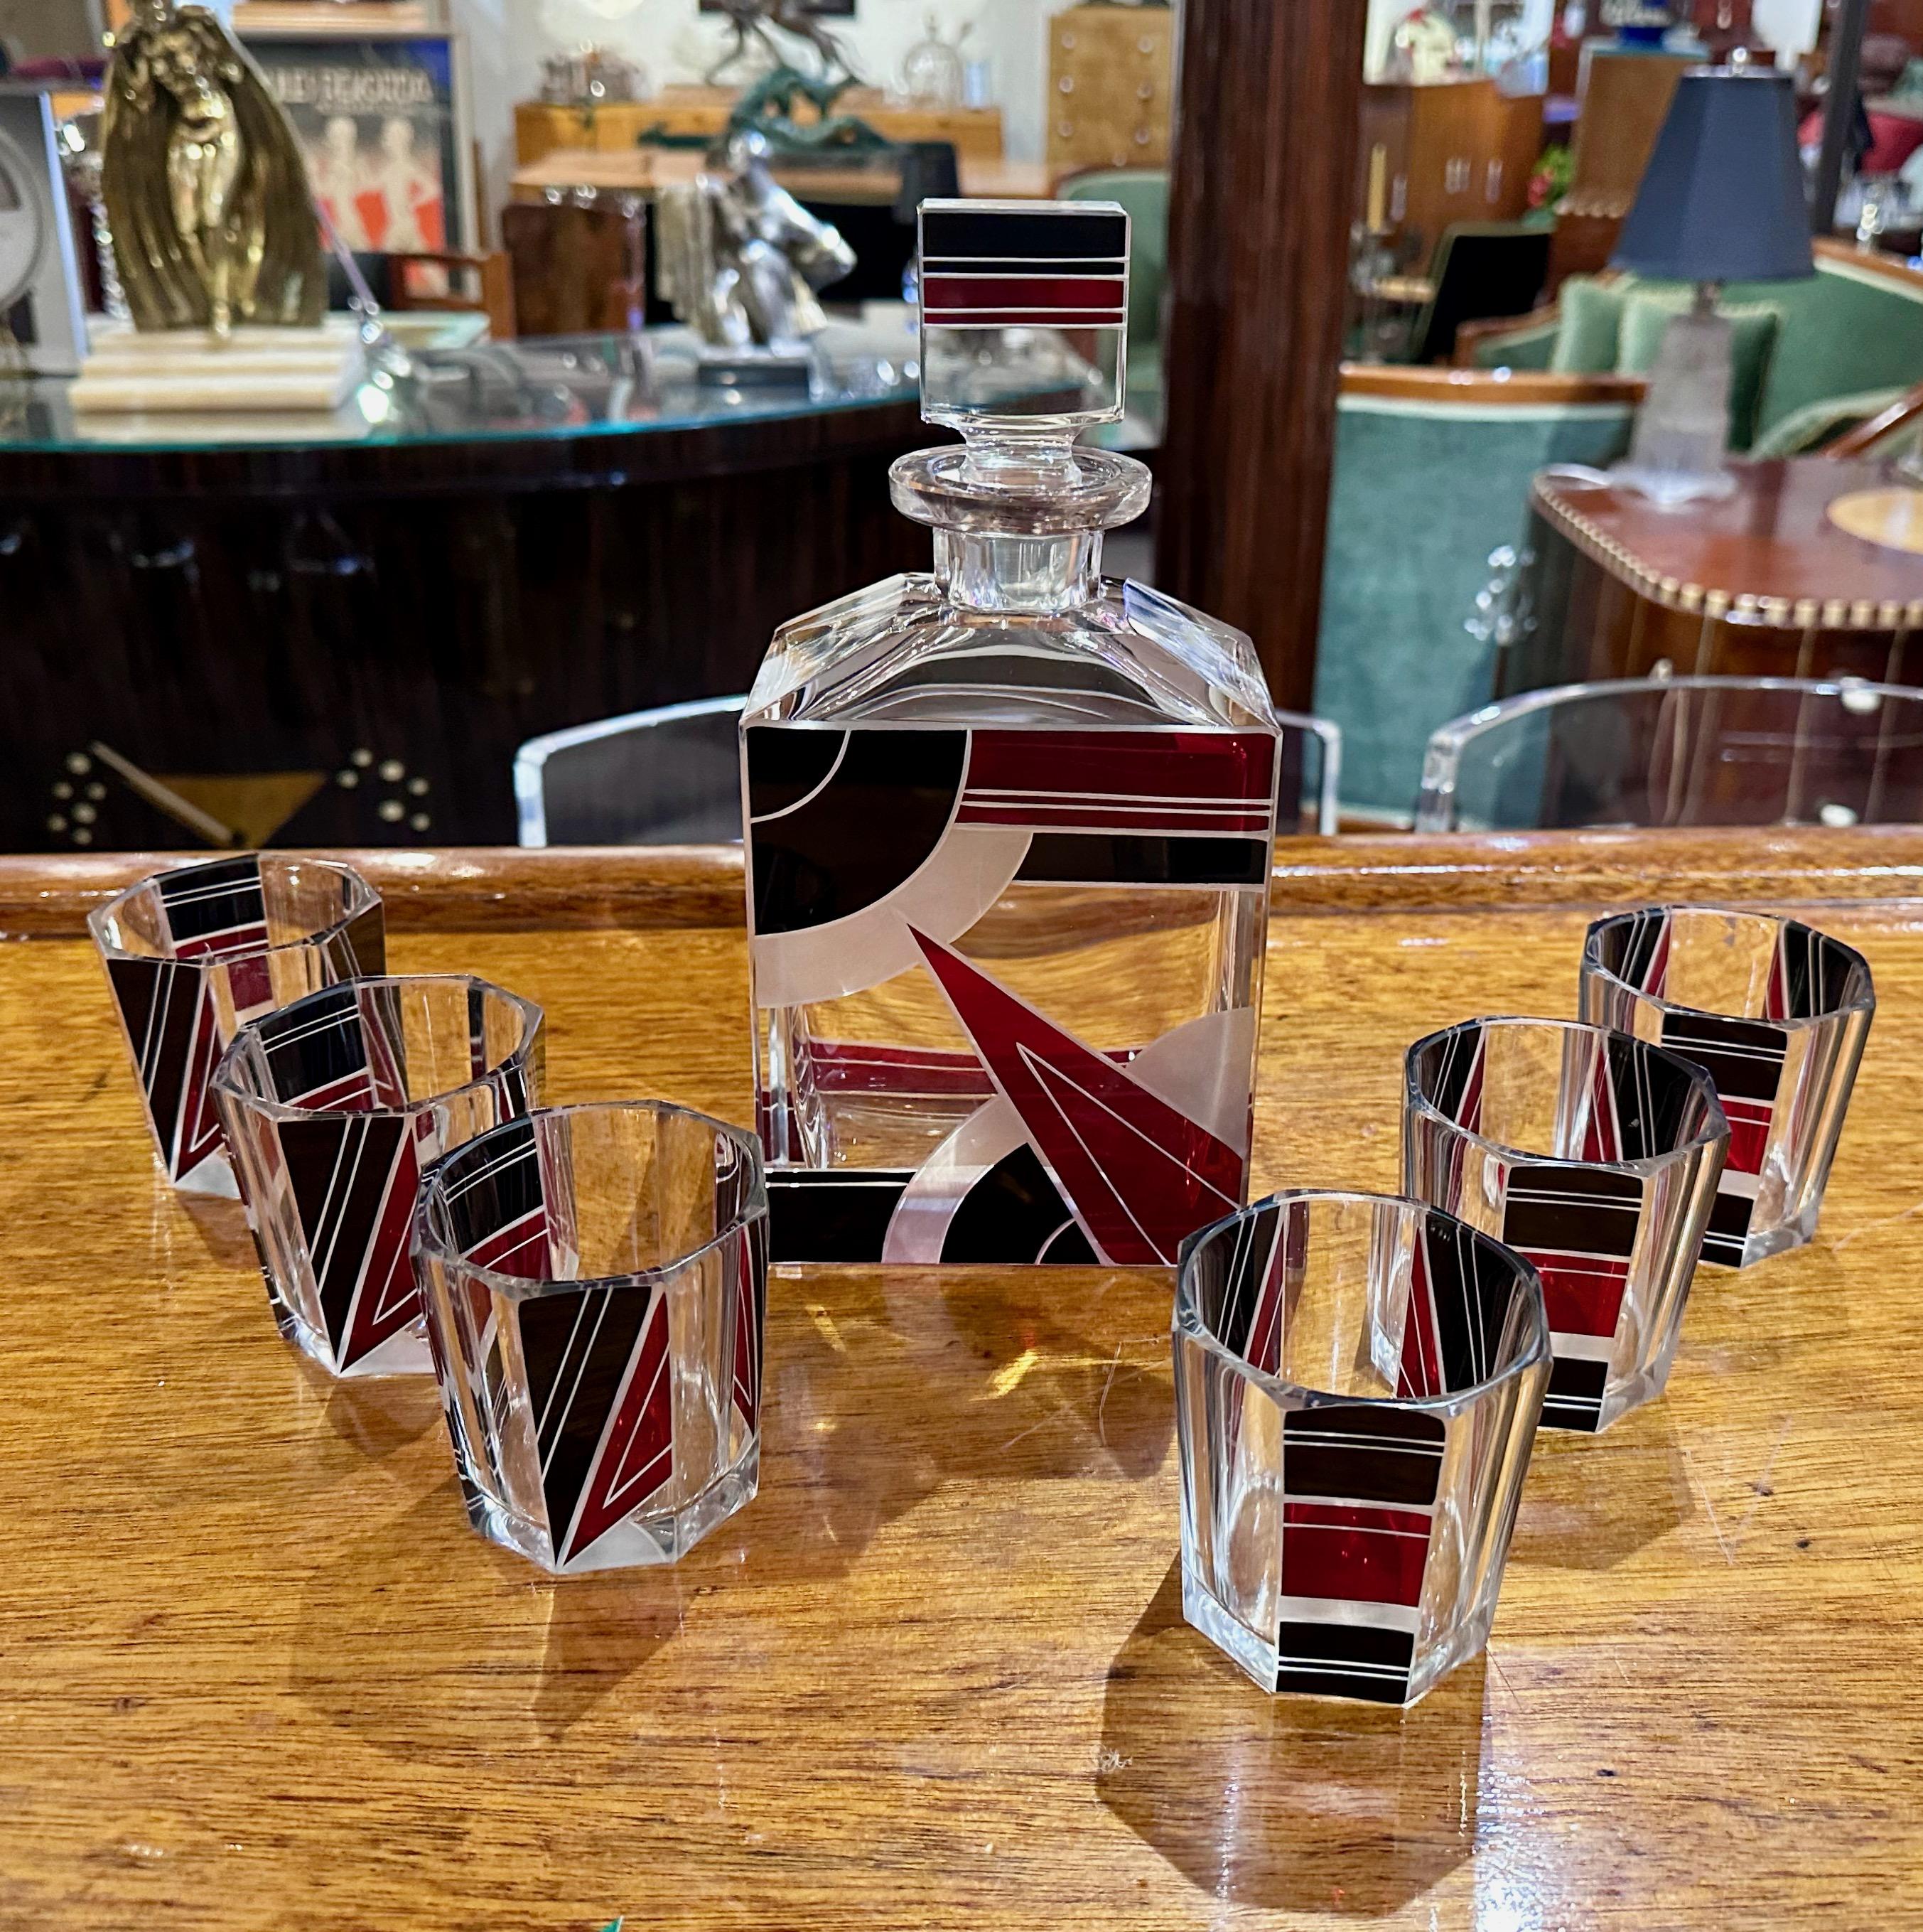 A stylized Czech Decanter Set with deep red and black designs – the work of innovative and forward-thinking artist Karl Palda.  The glasses are an especially nice size- not the tiny shot glasses that often accompany decanter sets of this type, but a